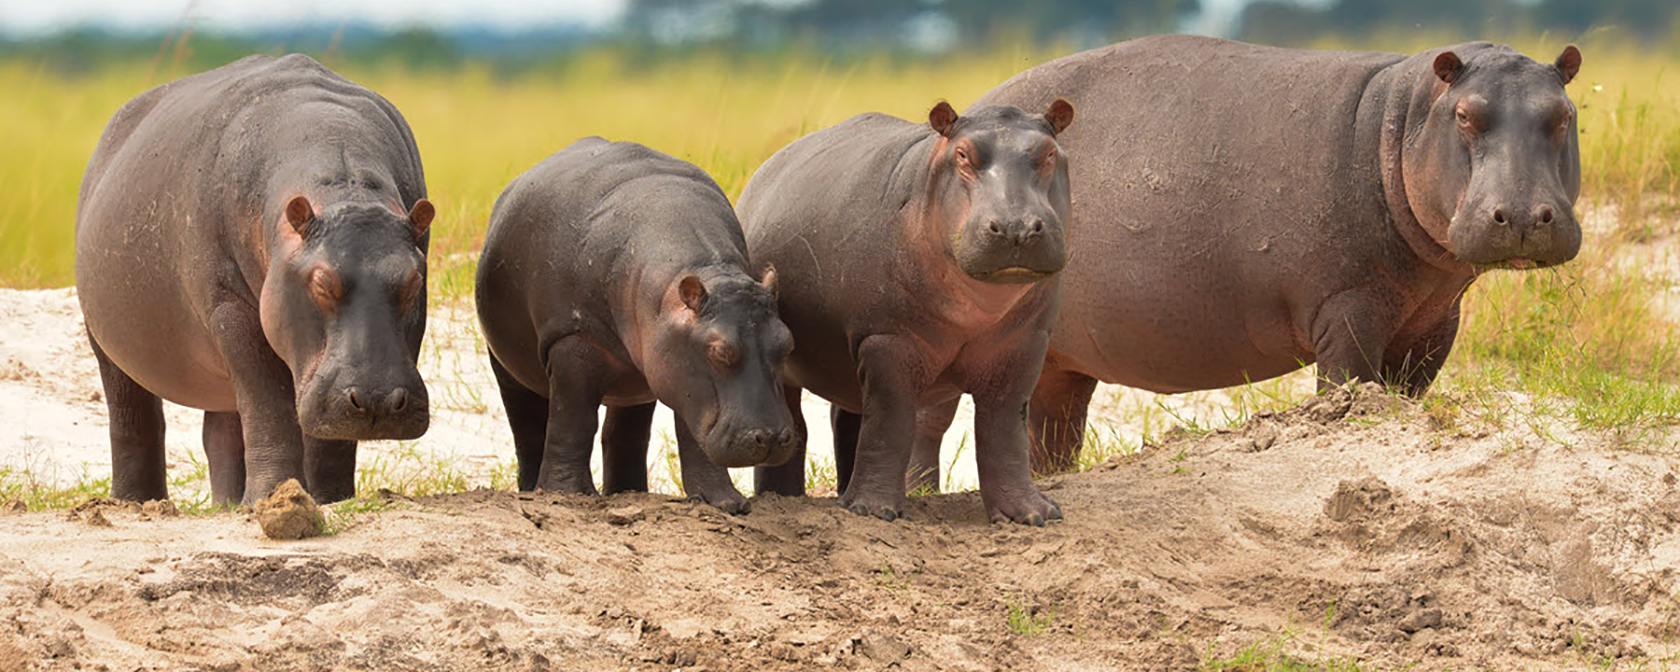 We’re prepared to sue to get hippos the protections they need